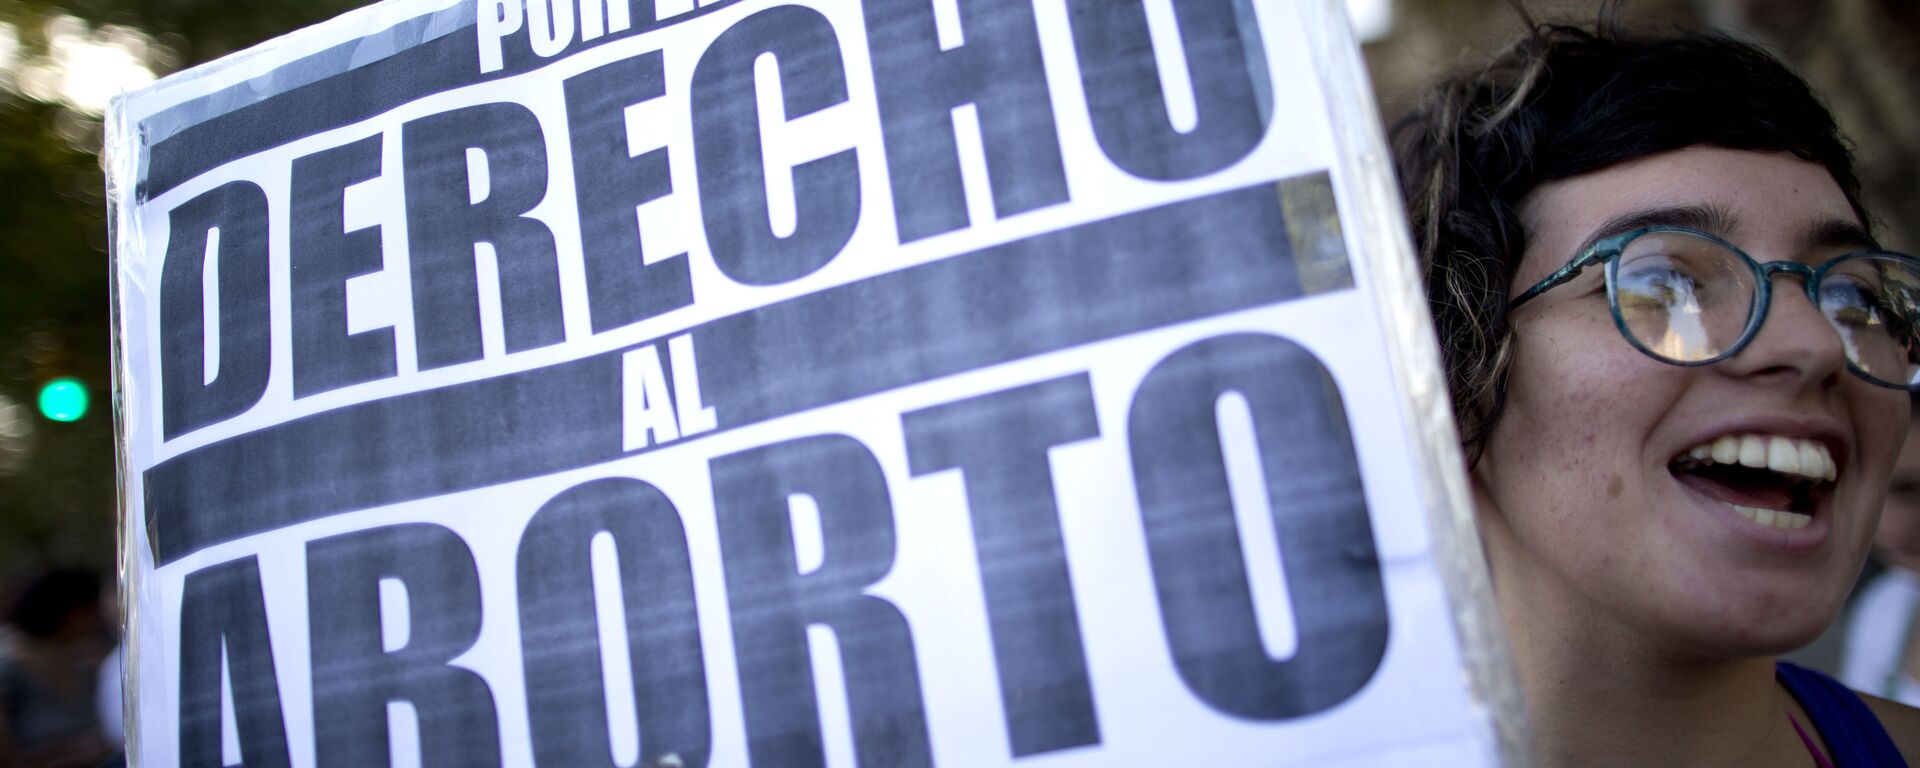 A woman holds a banner that reads in Spanish For the right to abort, during a rally in Buenos Aires, Argentina - Sputnik Mundo, 1920, 02.12.2021